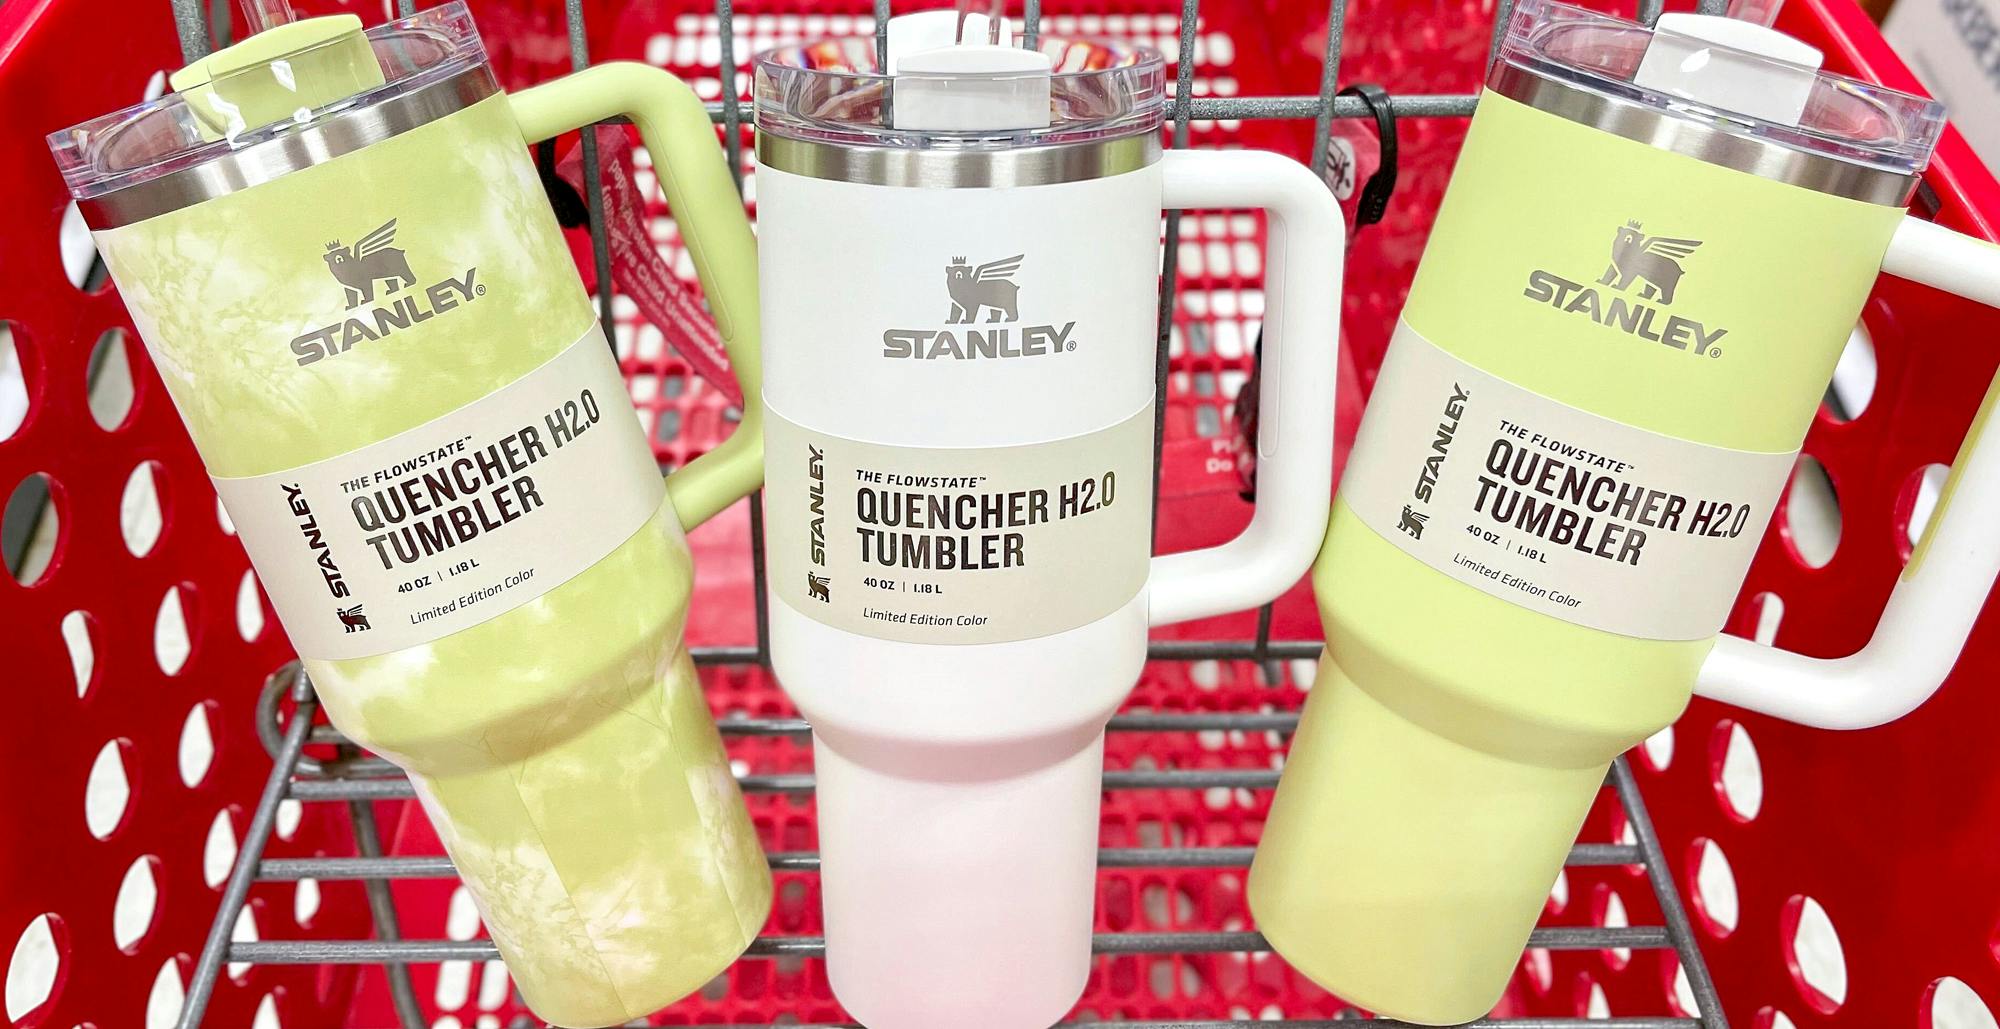 Stanley Tumbler Restocks in Coveted Colors, REI Members Get 20% Off Through March 27